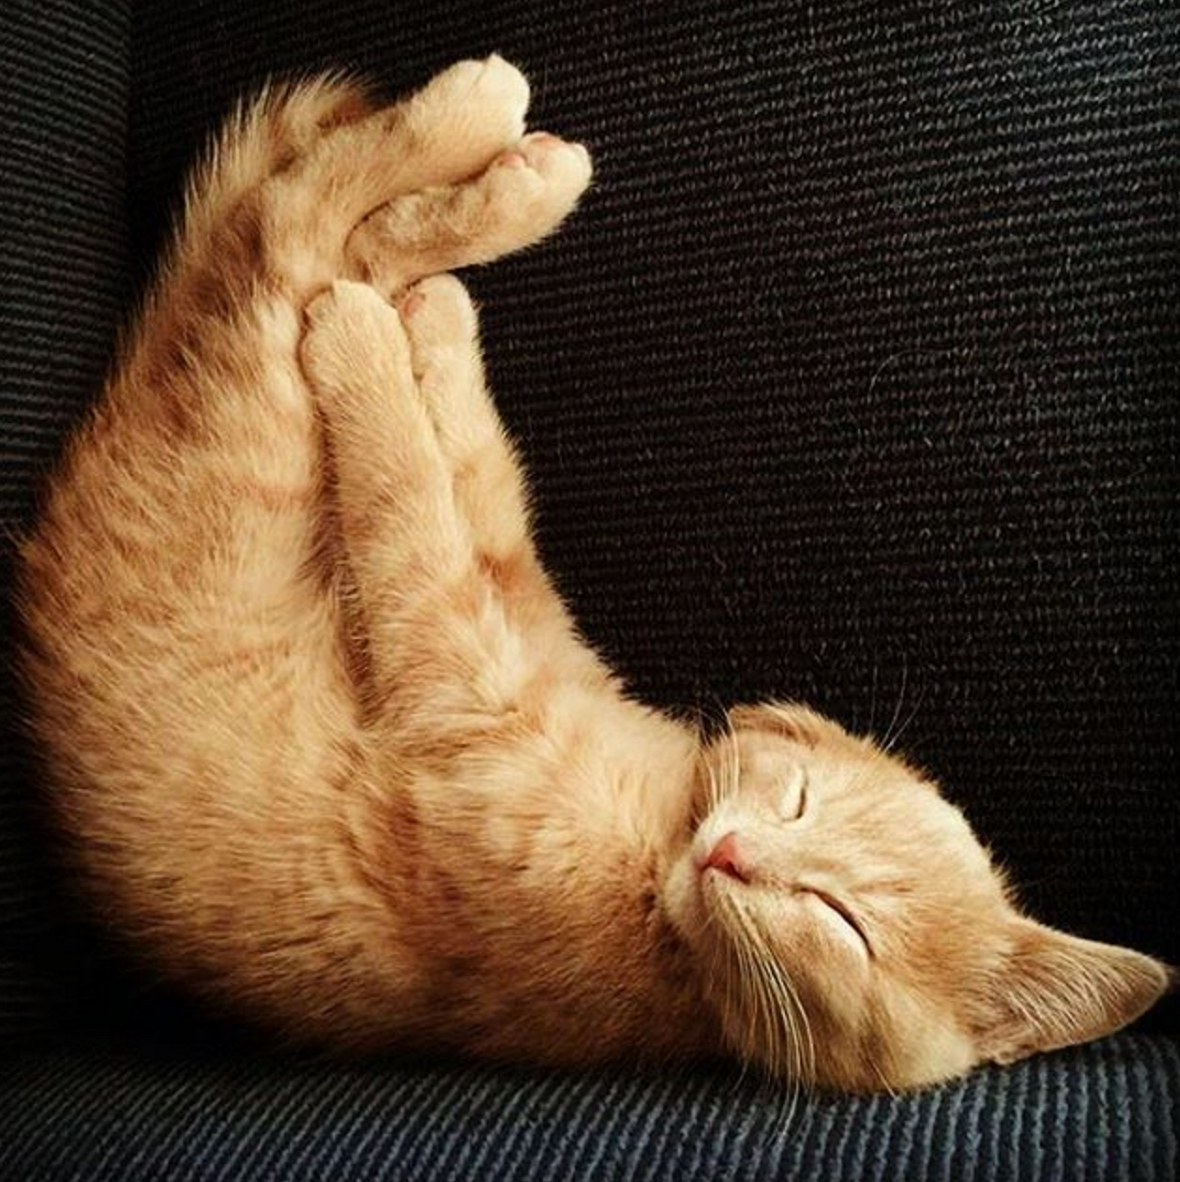 Cats have definitely mastered the art of chilling!